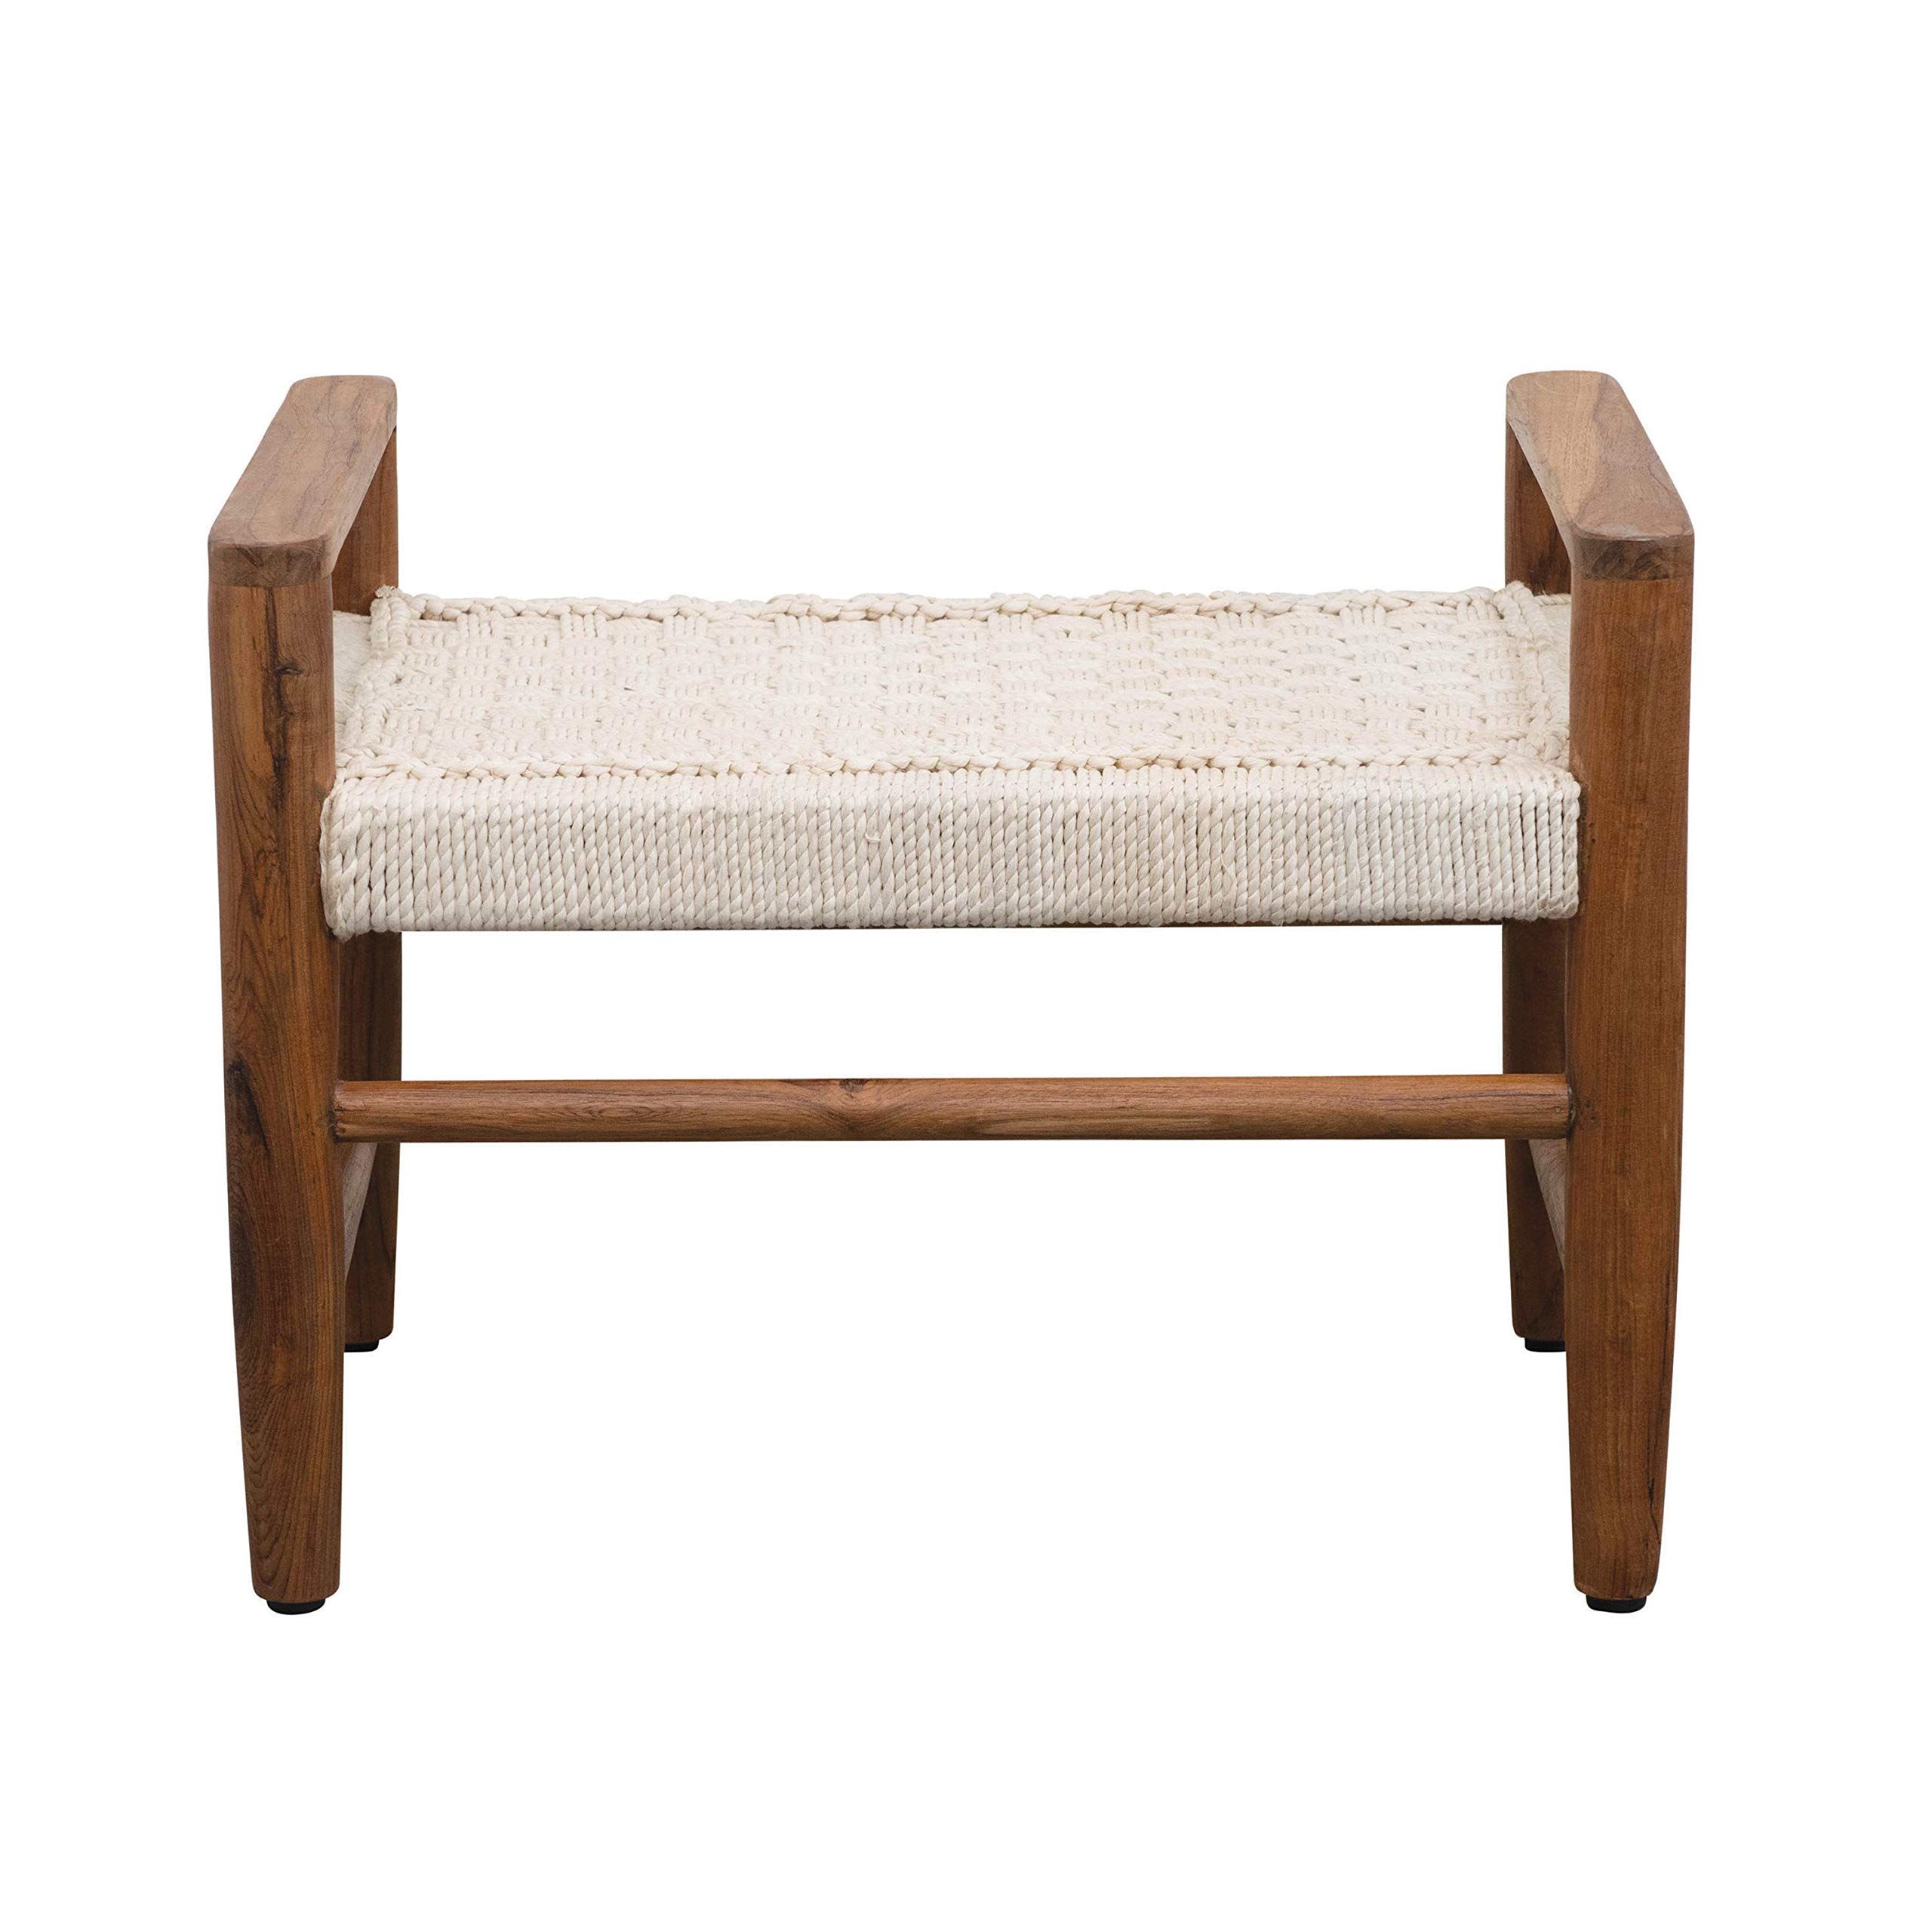 Bloomingville Teak Wood & Hand-Woven Cotton Rope, Natural Bench | Amazon (US)